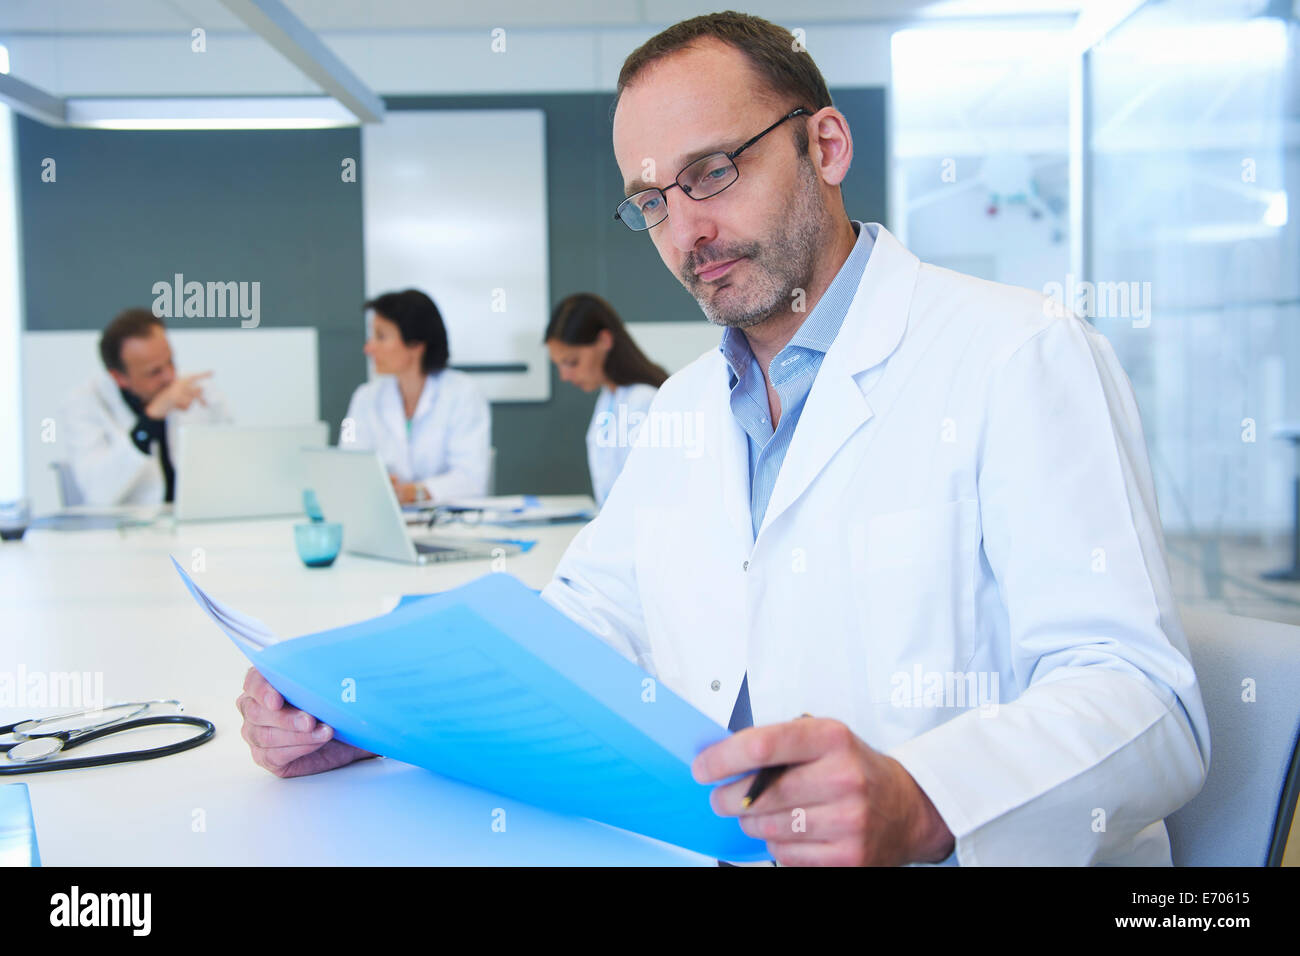 Male doctor looking at records, colleagues having discussion behind Stock Photo